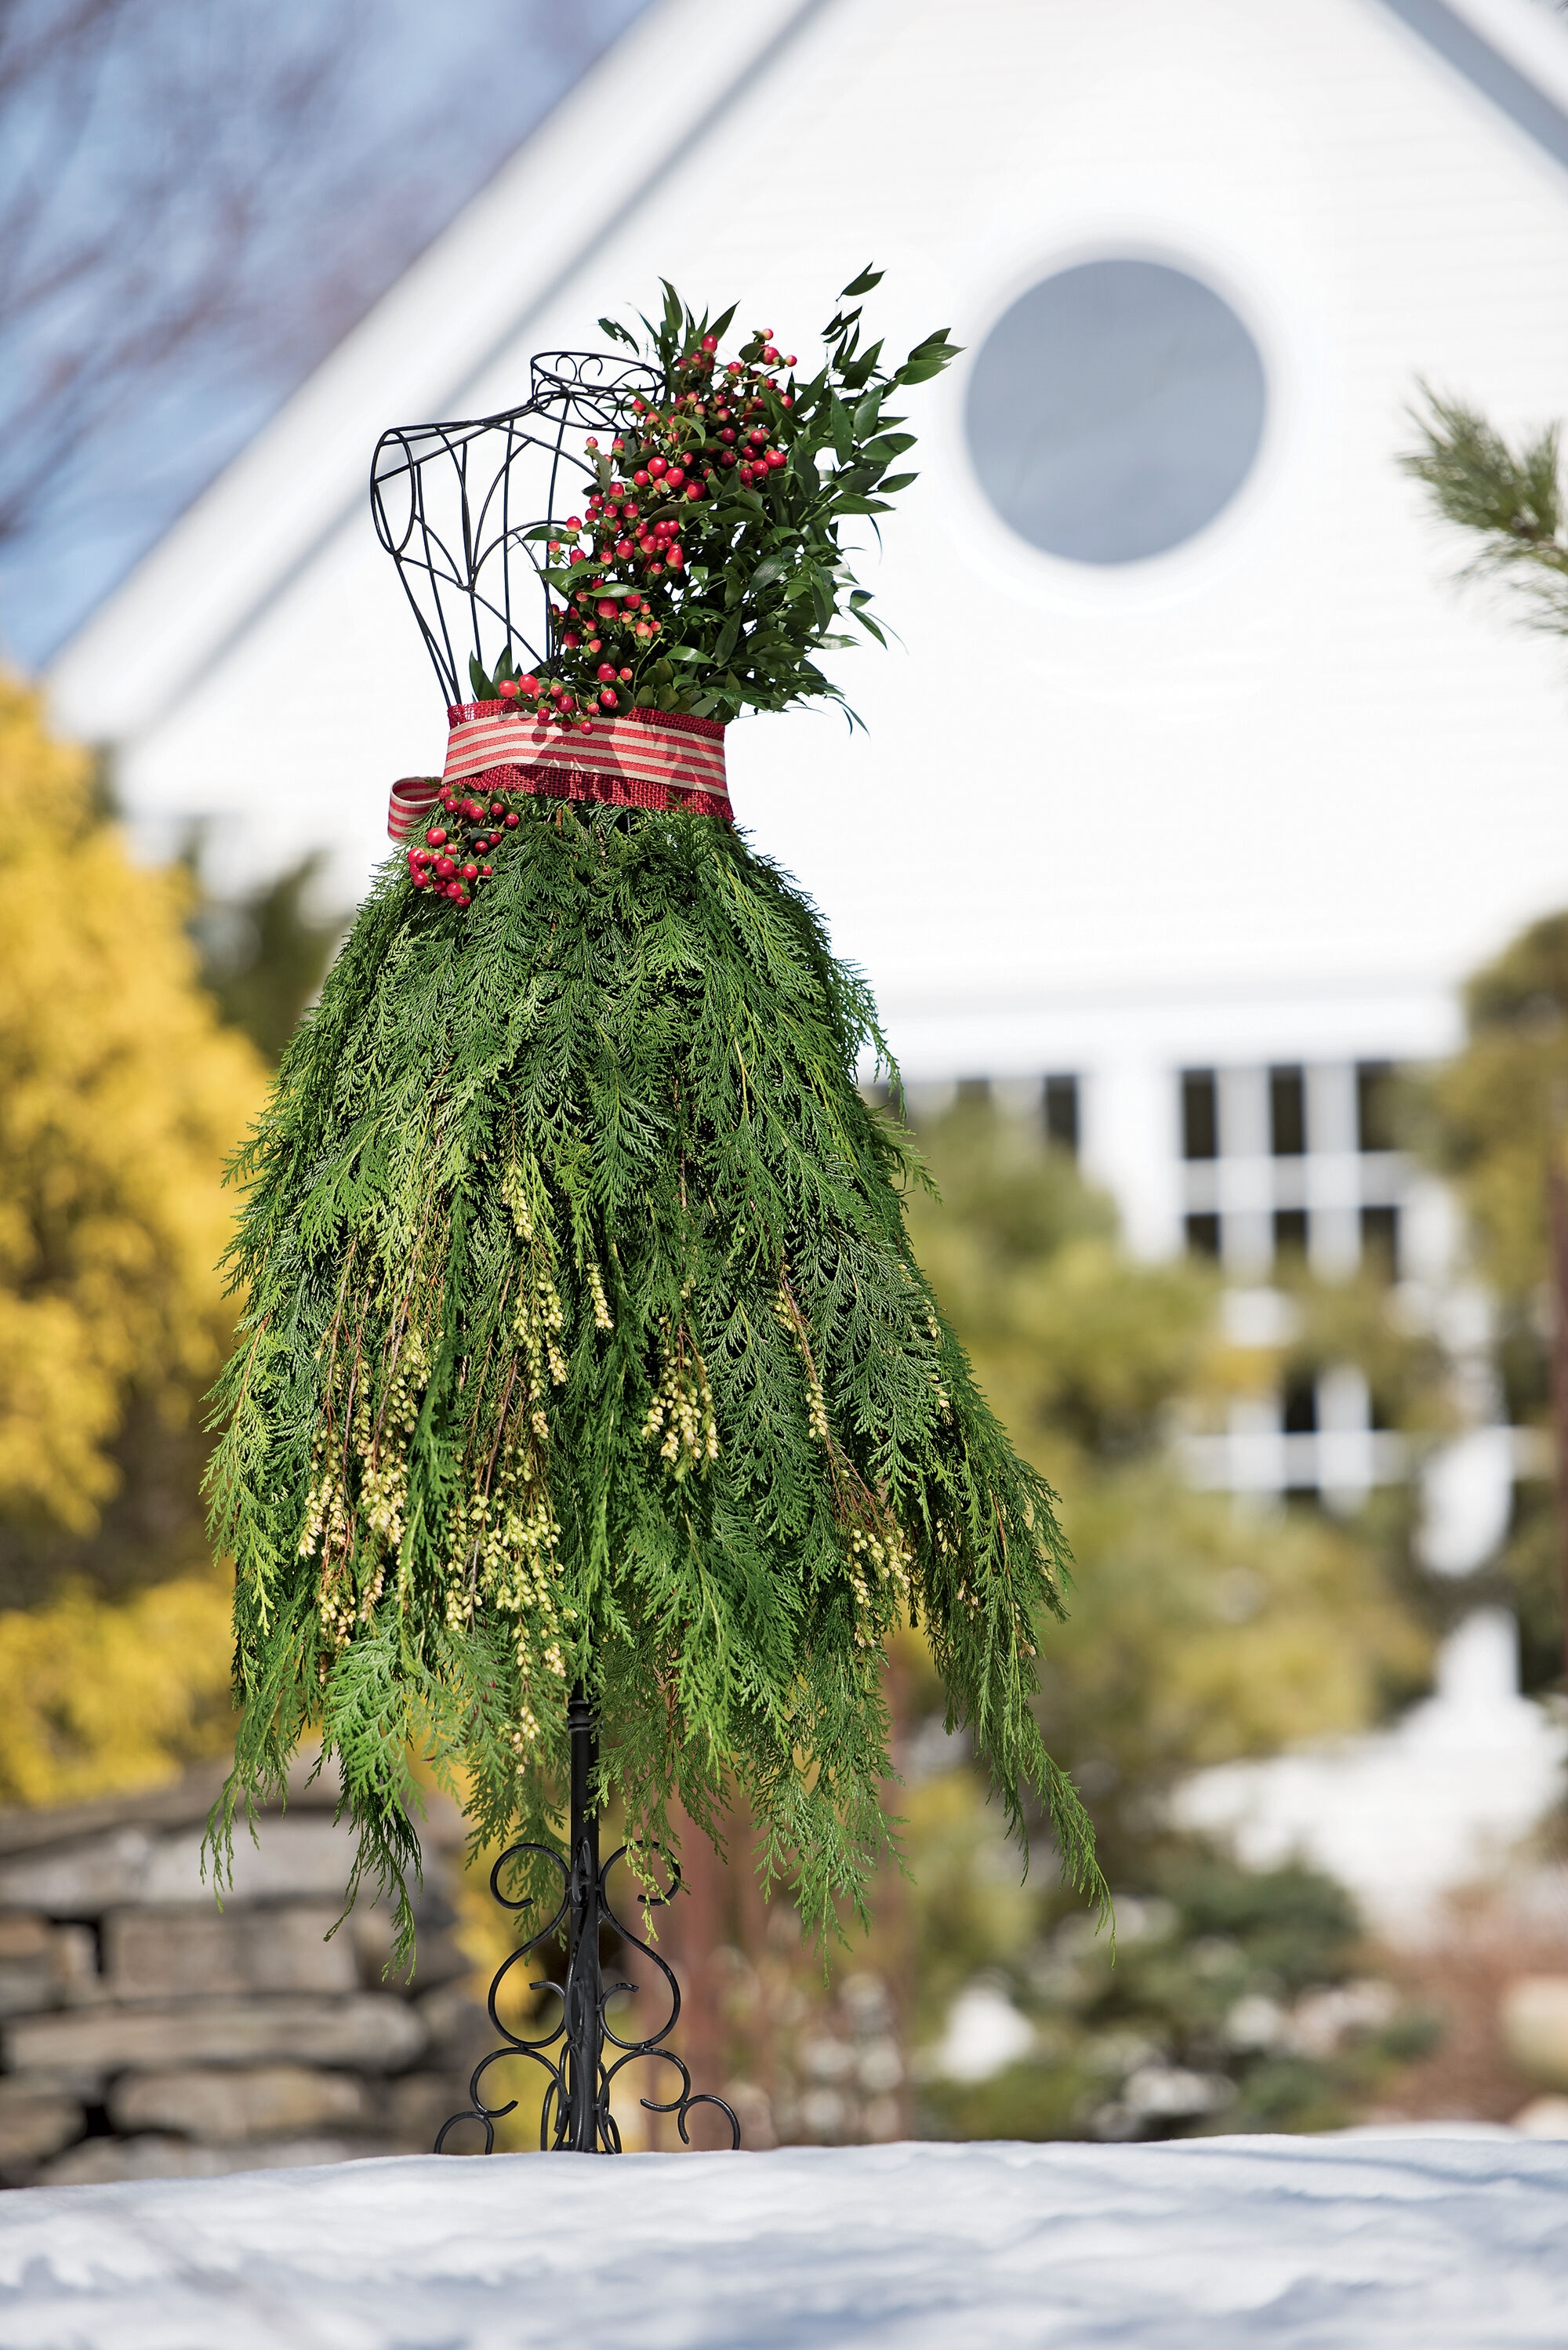 The 10 Best Dress Form Christmas Trees on a Wire Dress form 